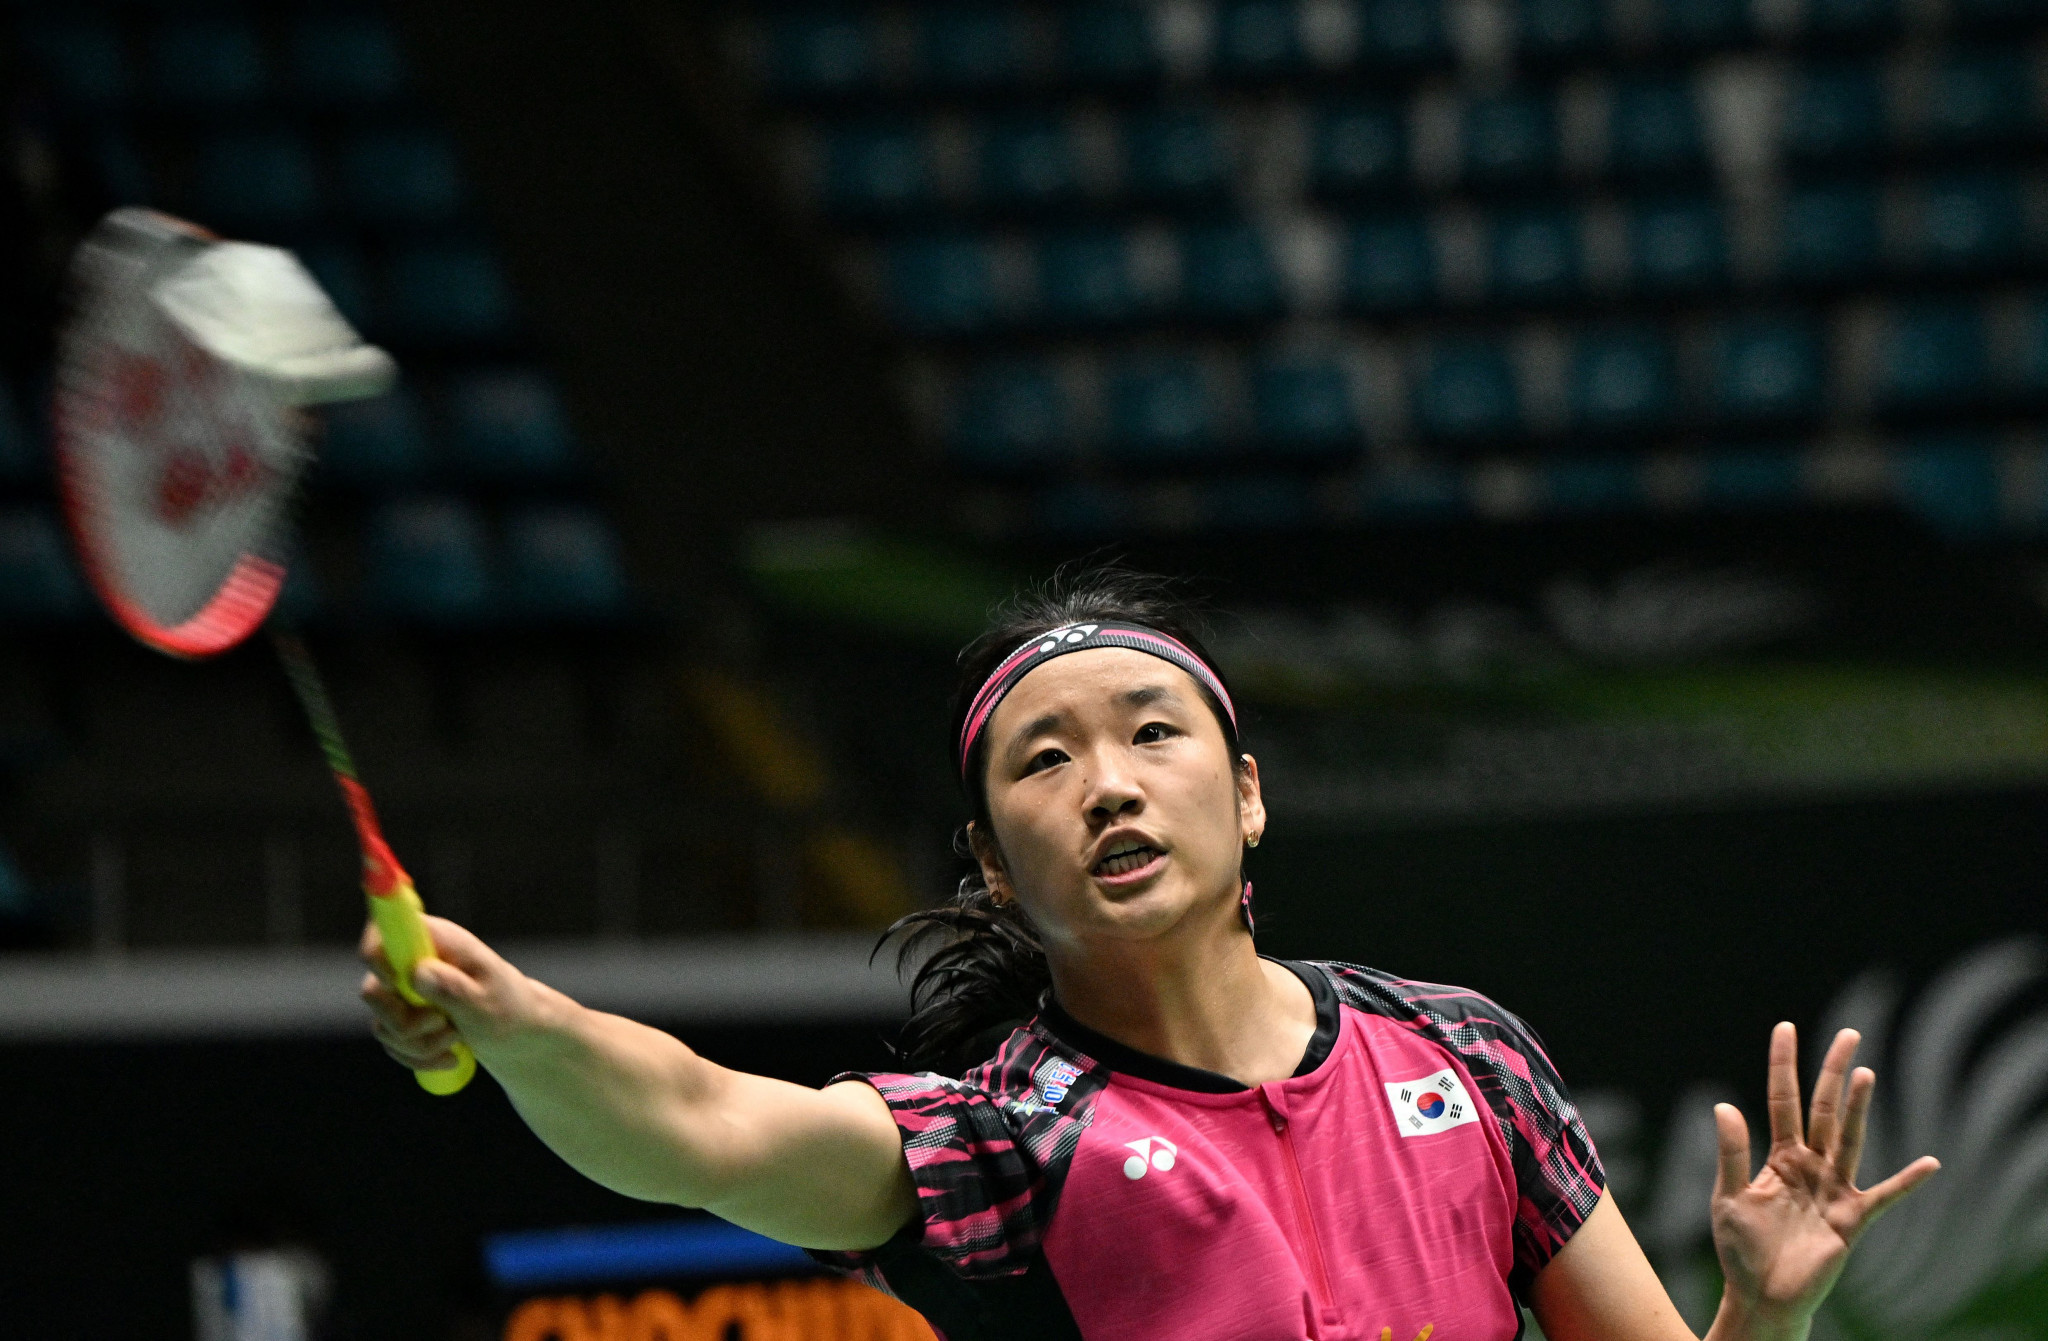 South Korea's women's singles second seed An Se-young is set to face Indonesia's qualifier Stephanie Widjaja in the first round of the Badminton Asia Championships ©Getty Images